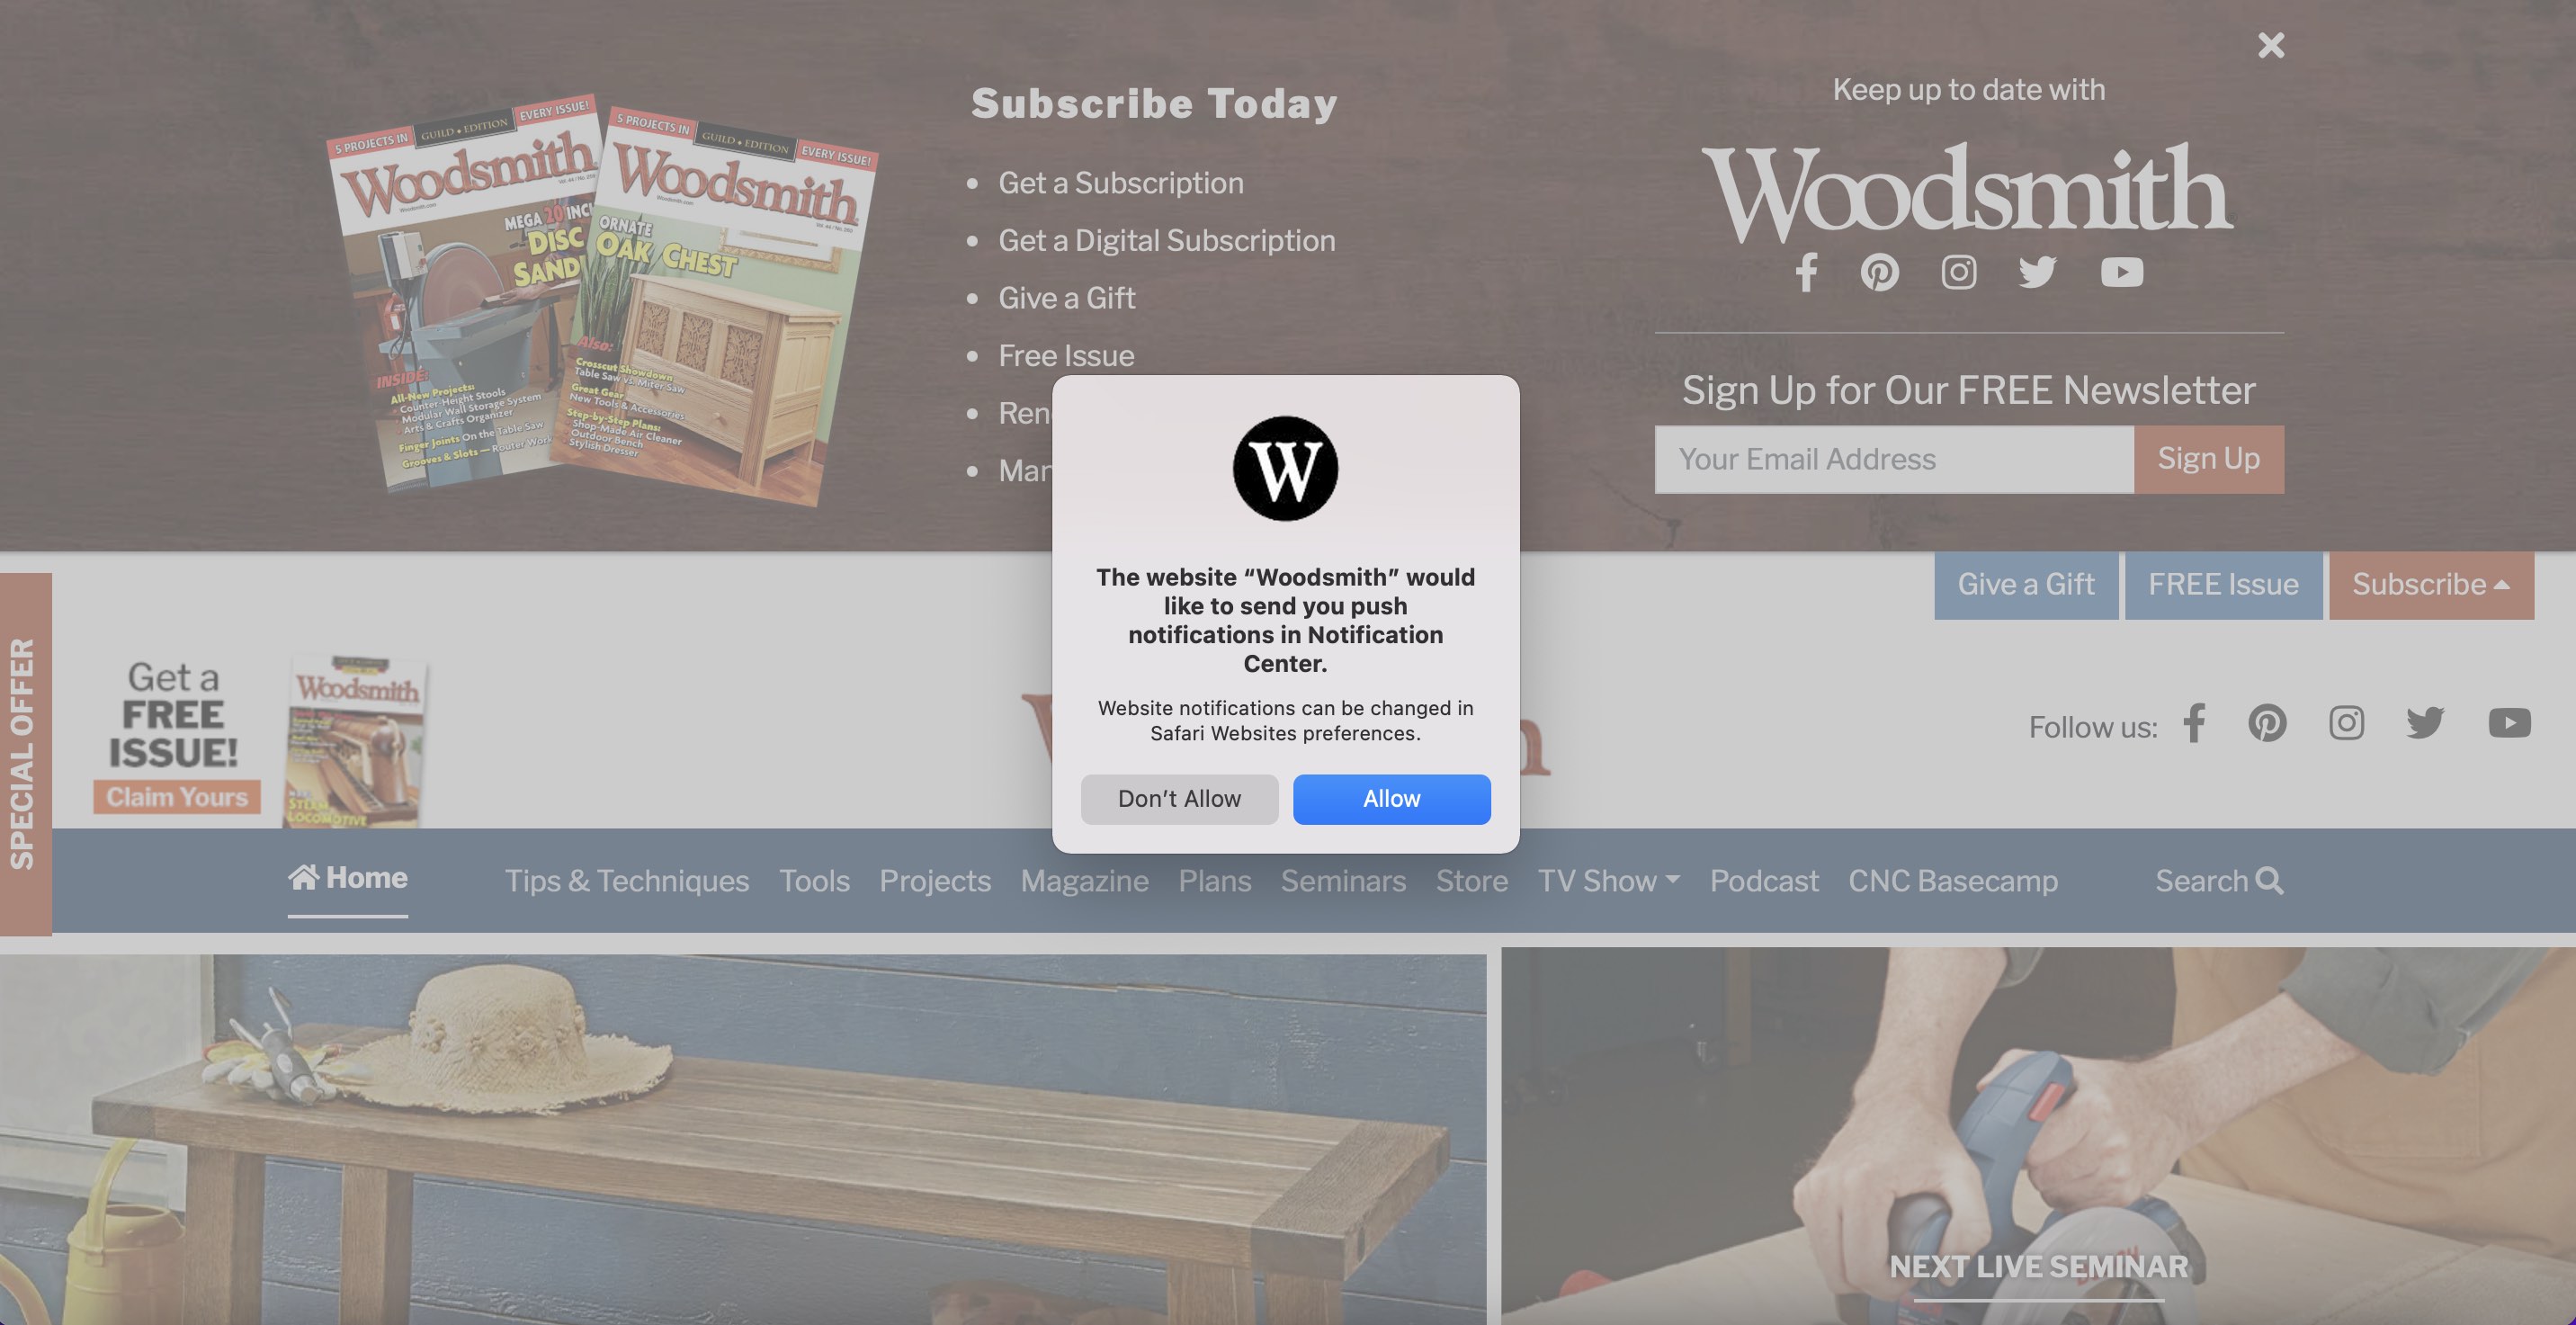 Sign Up for Woodsmith Push Notifications and Never Miss an Article